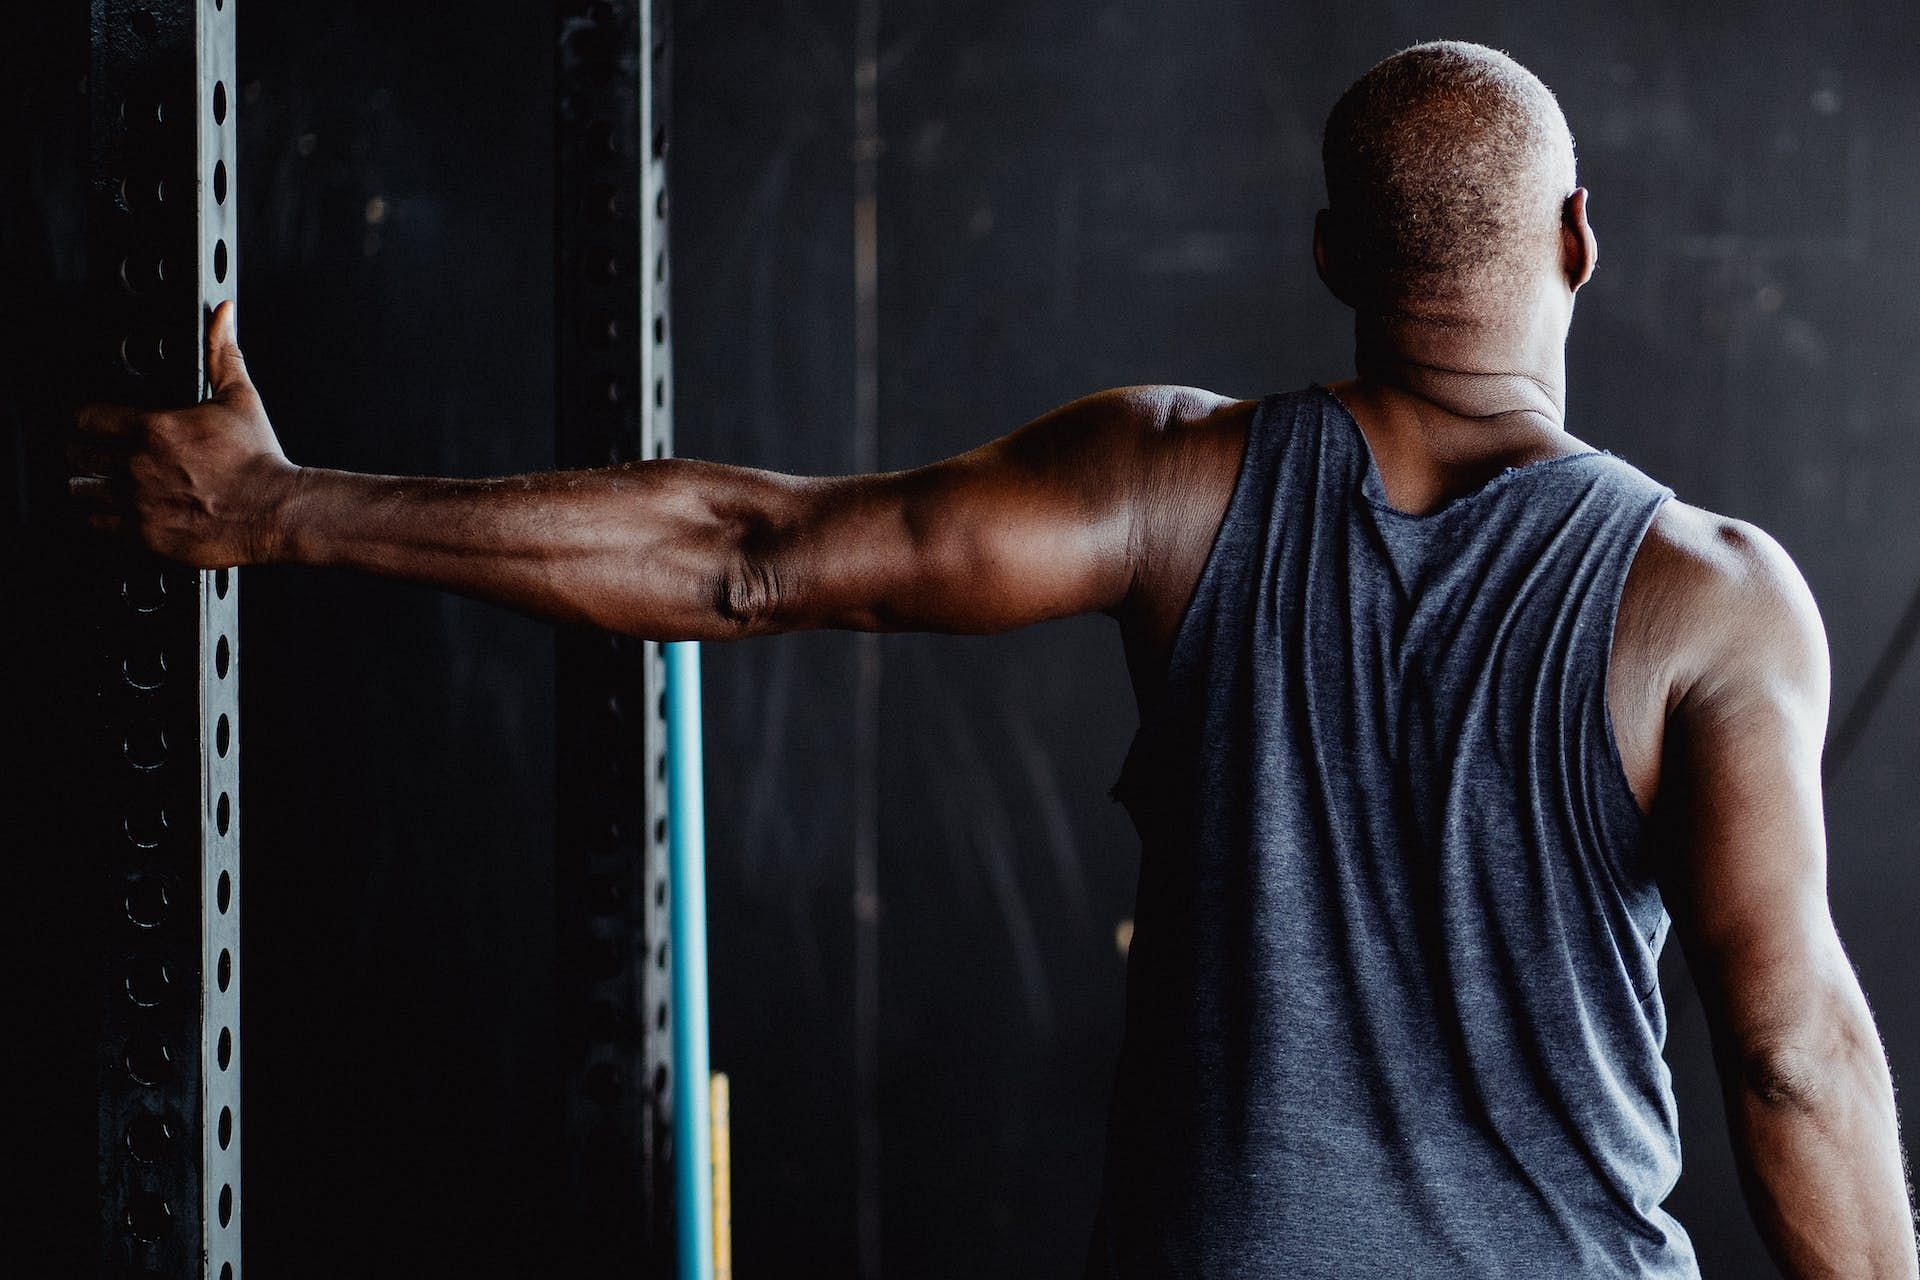 Stretches for shoulders are very effective in relieving pain (Image via Pexels/Ketut Subiyanto)